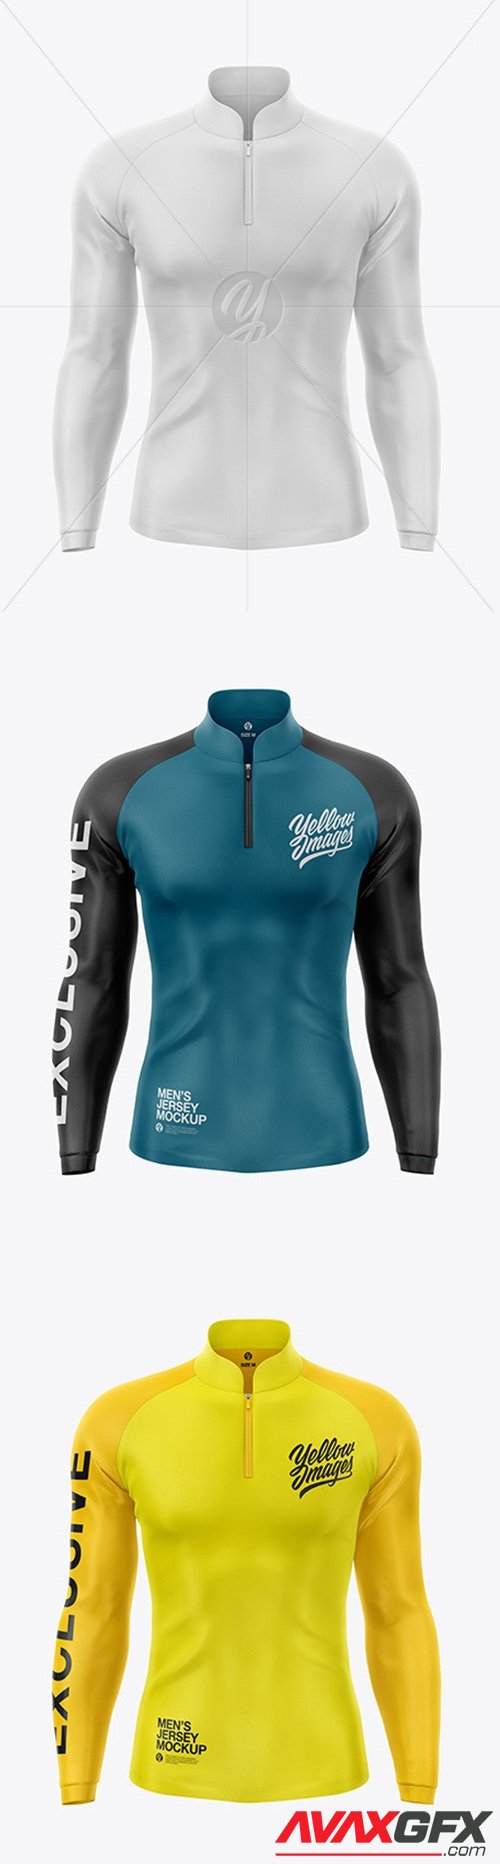 Mens Jersey With Long Sleeve Mockup - Front View 49331 TIF